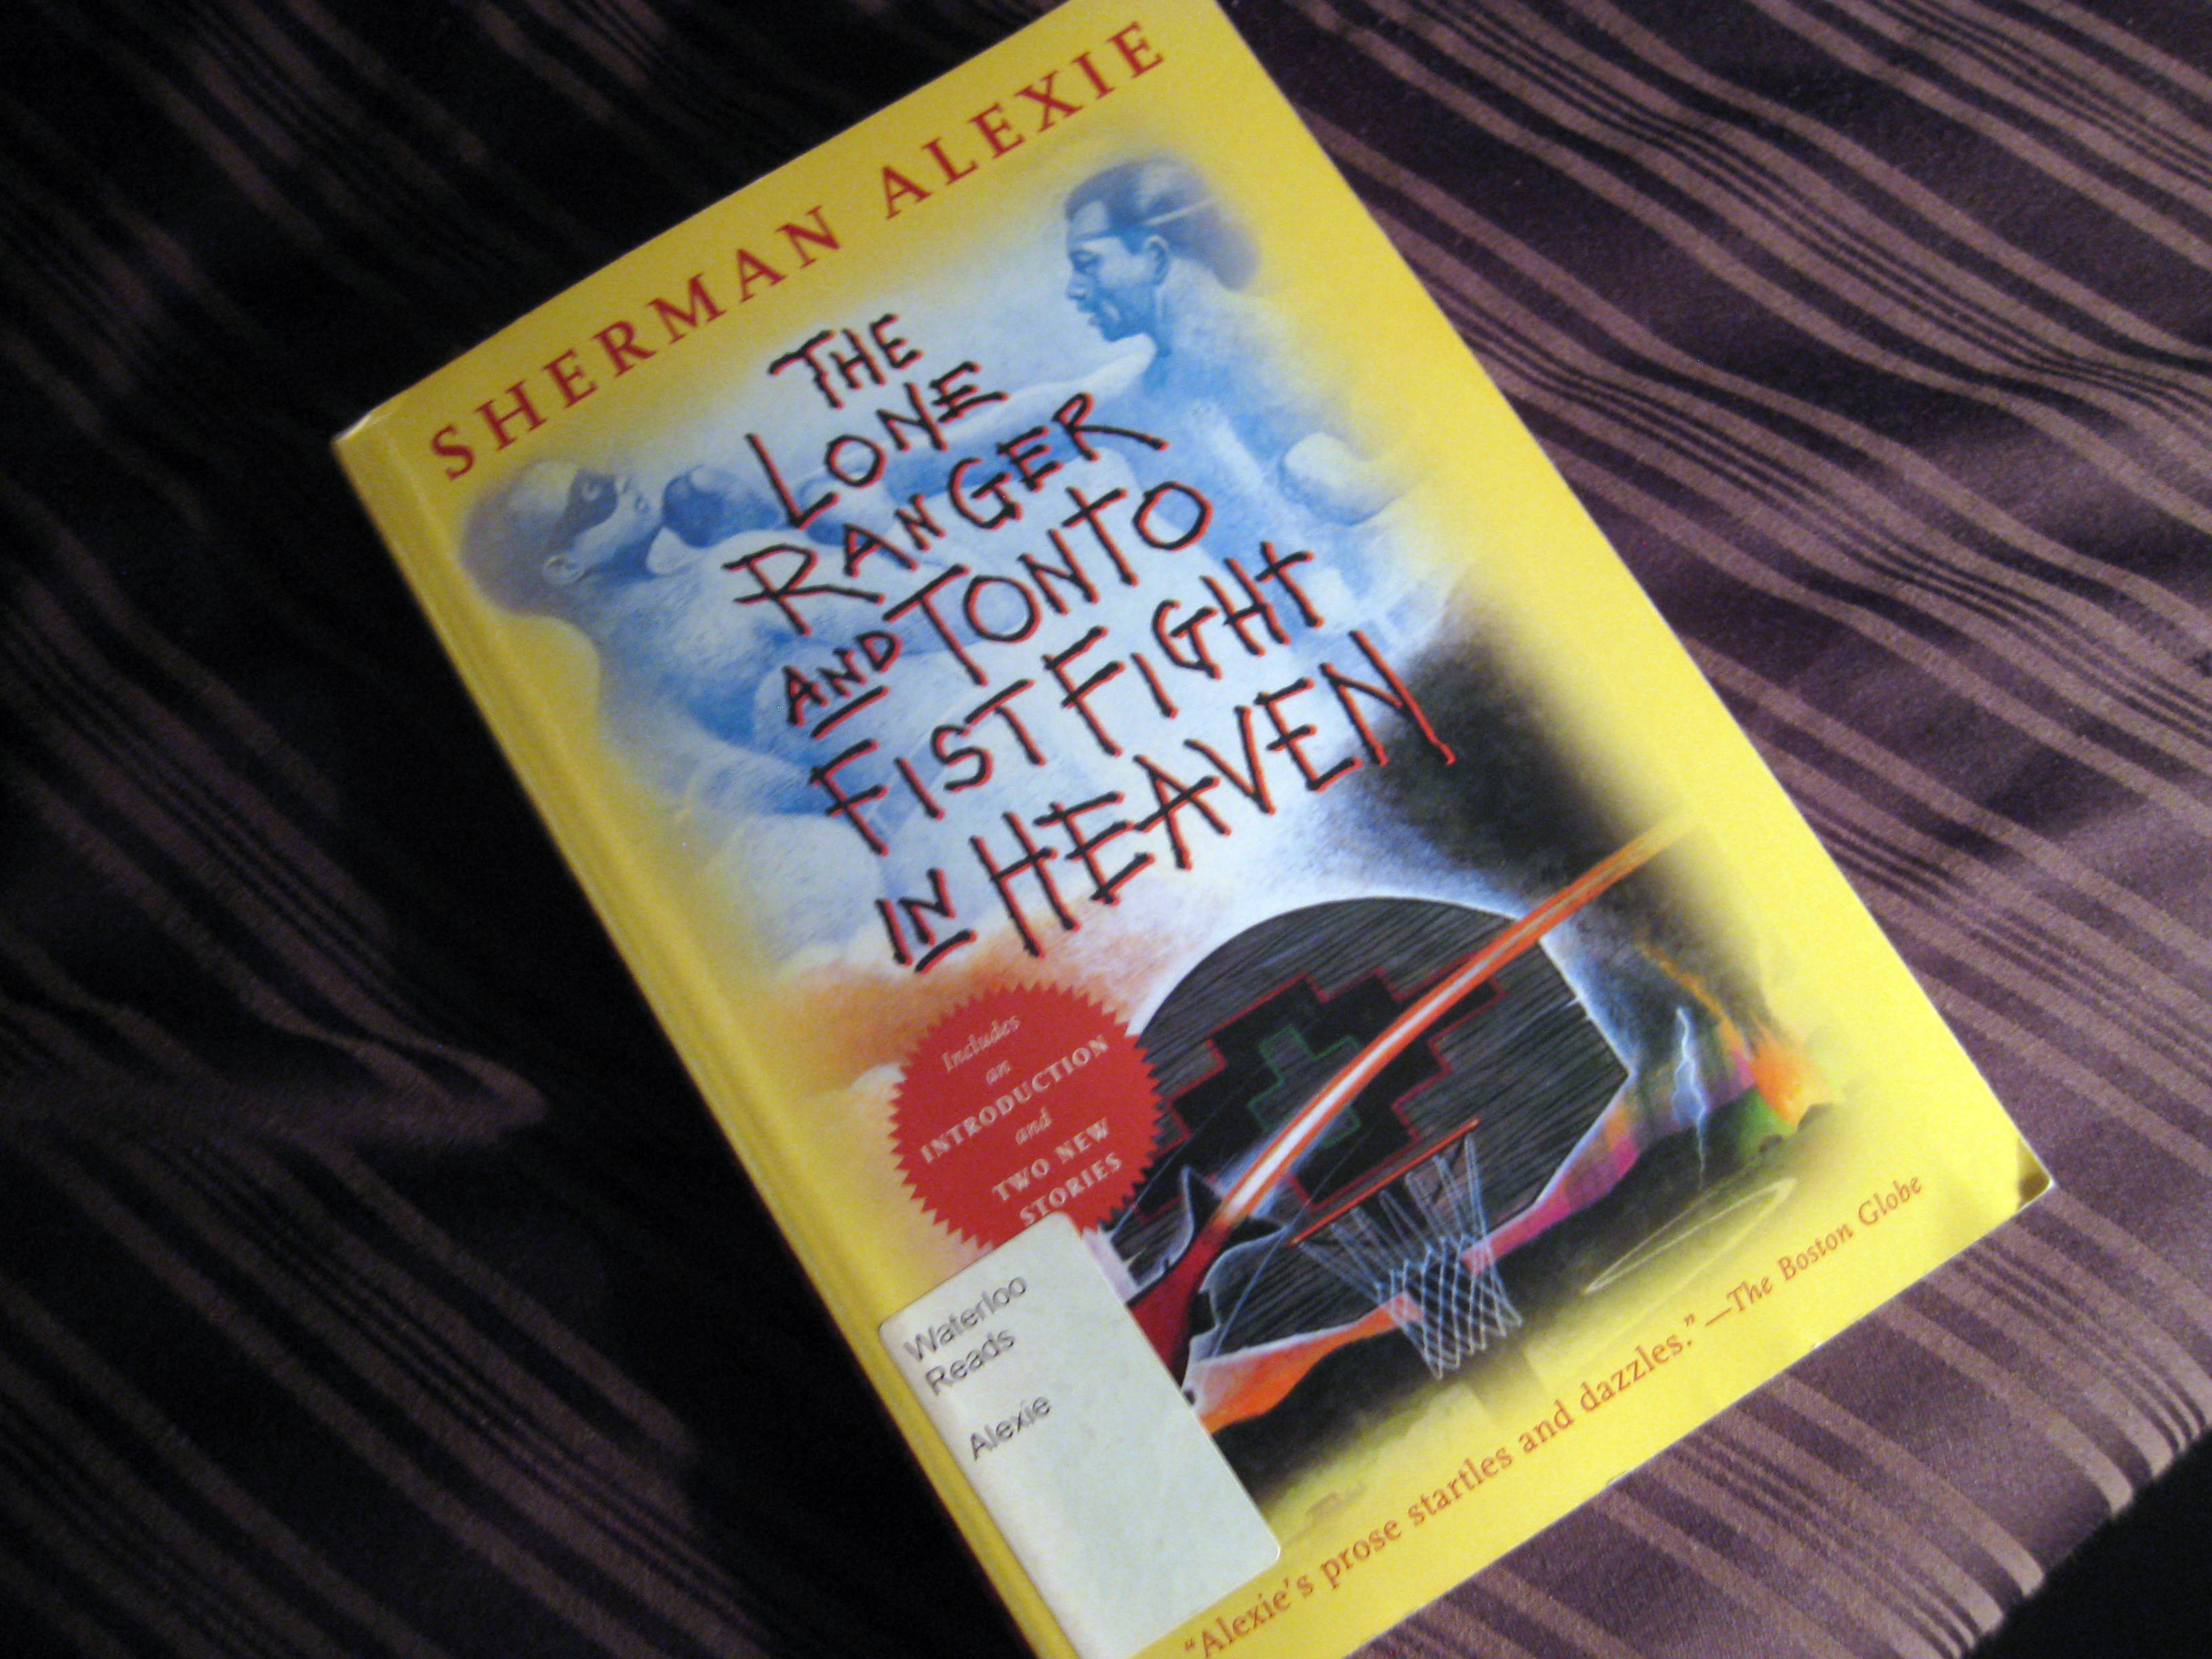 The Lone Ranger and Tonto Fist Fight in Heaven by Sherman Alexie